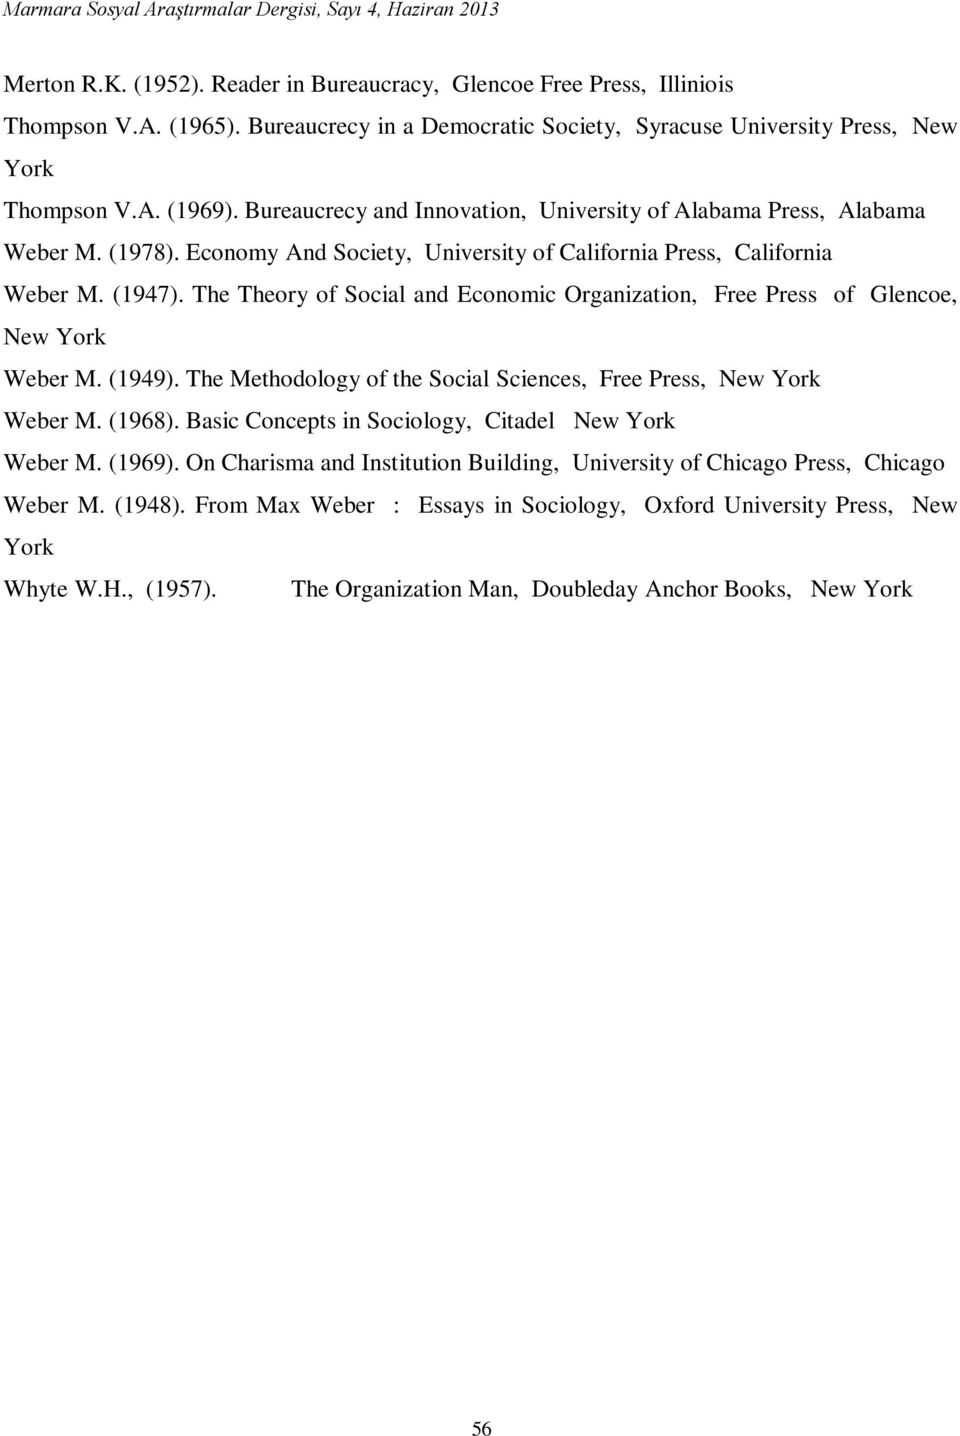 The Theory of Social and Economic Organization, Free Press of Glencoe, New York Weber M. (1949). The Methodology of the Social Sciences, Free Press, New York Weber M. (1968).